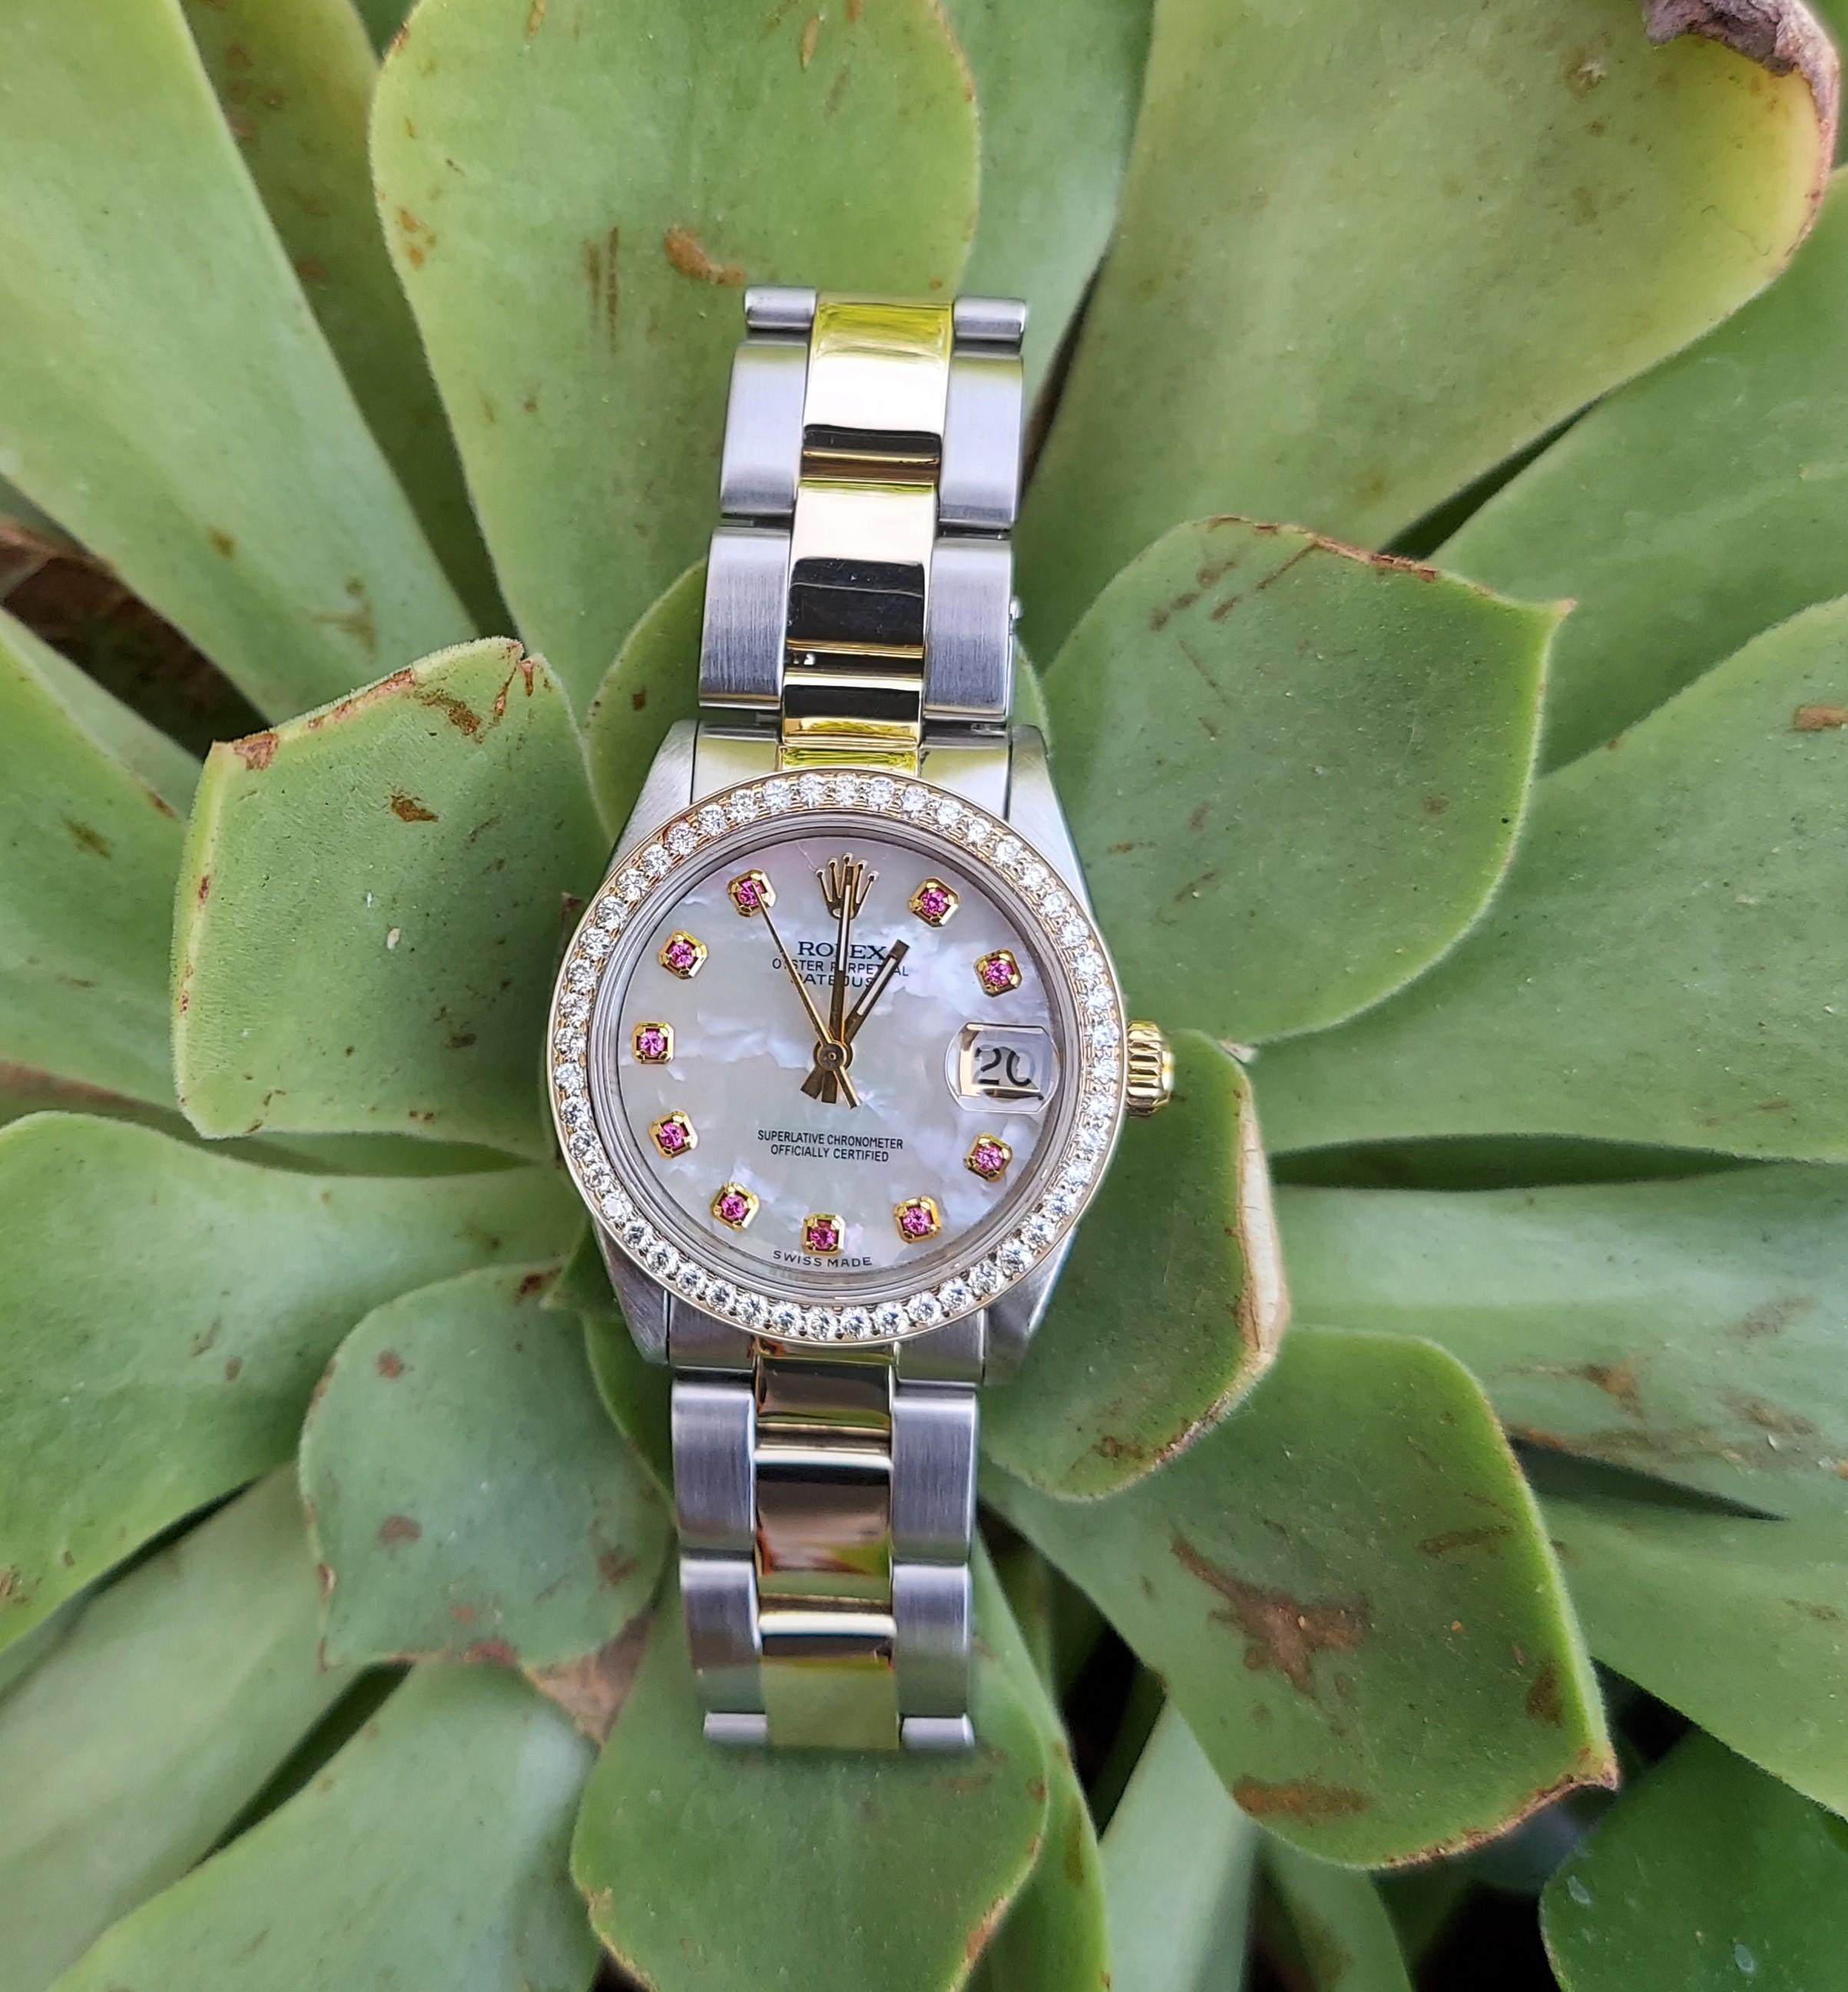 (Watch Description) 
Brand - Rolex
Gender - Ladies 
Model - 6827 Datejust
Metals - Yellow gold / Steel 
Case size - 31mm
Bezel - Yellow gold Diamond
Crystal - Sapphire
Movement - Automatic Cal.2035
Dial - Refinished MOP Diamond
Wrist band - Two tone